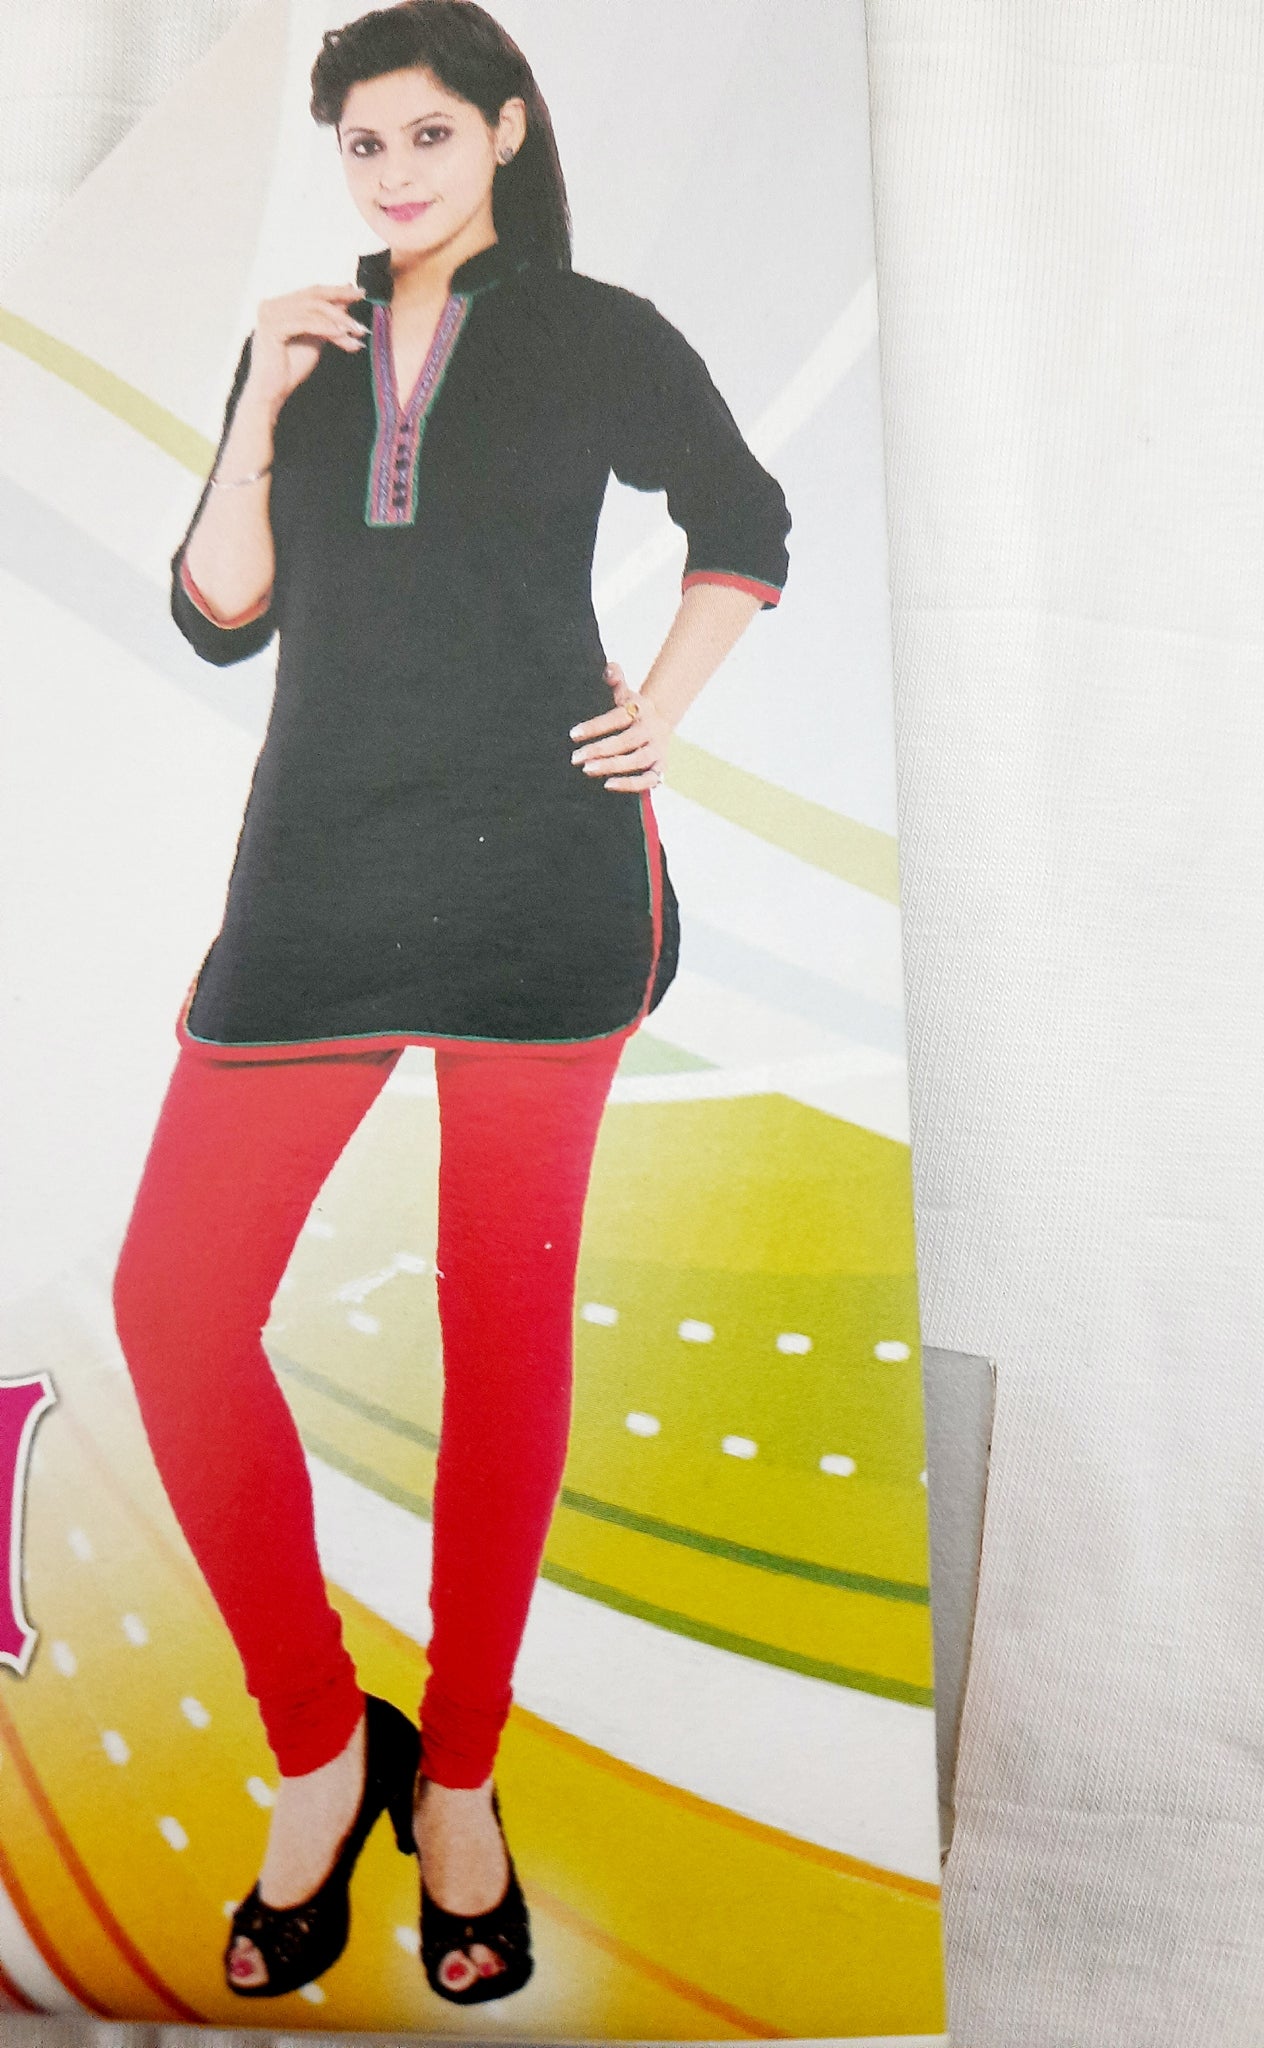 Lycra Leggings Manufacturer and Wholesale in China - NDH